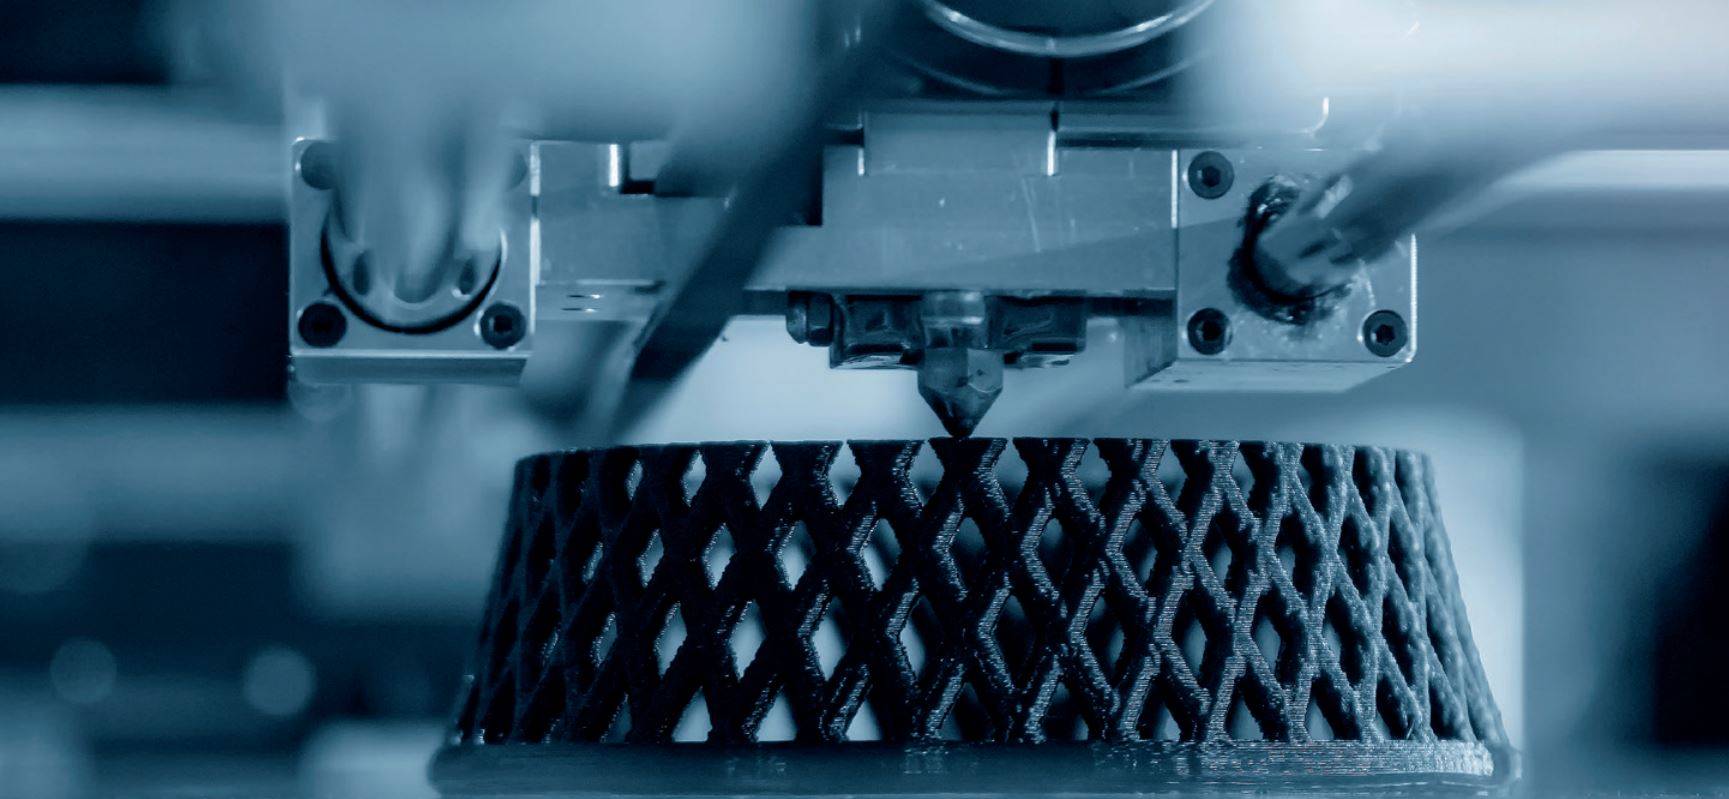 3d printing additive manufacturing